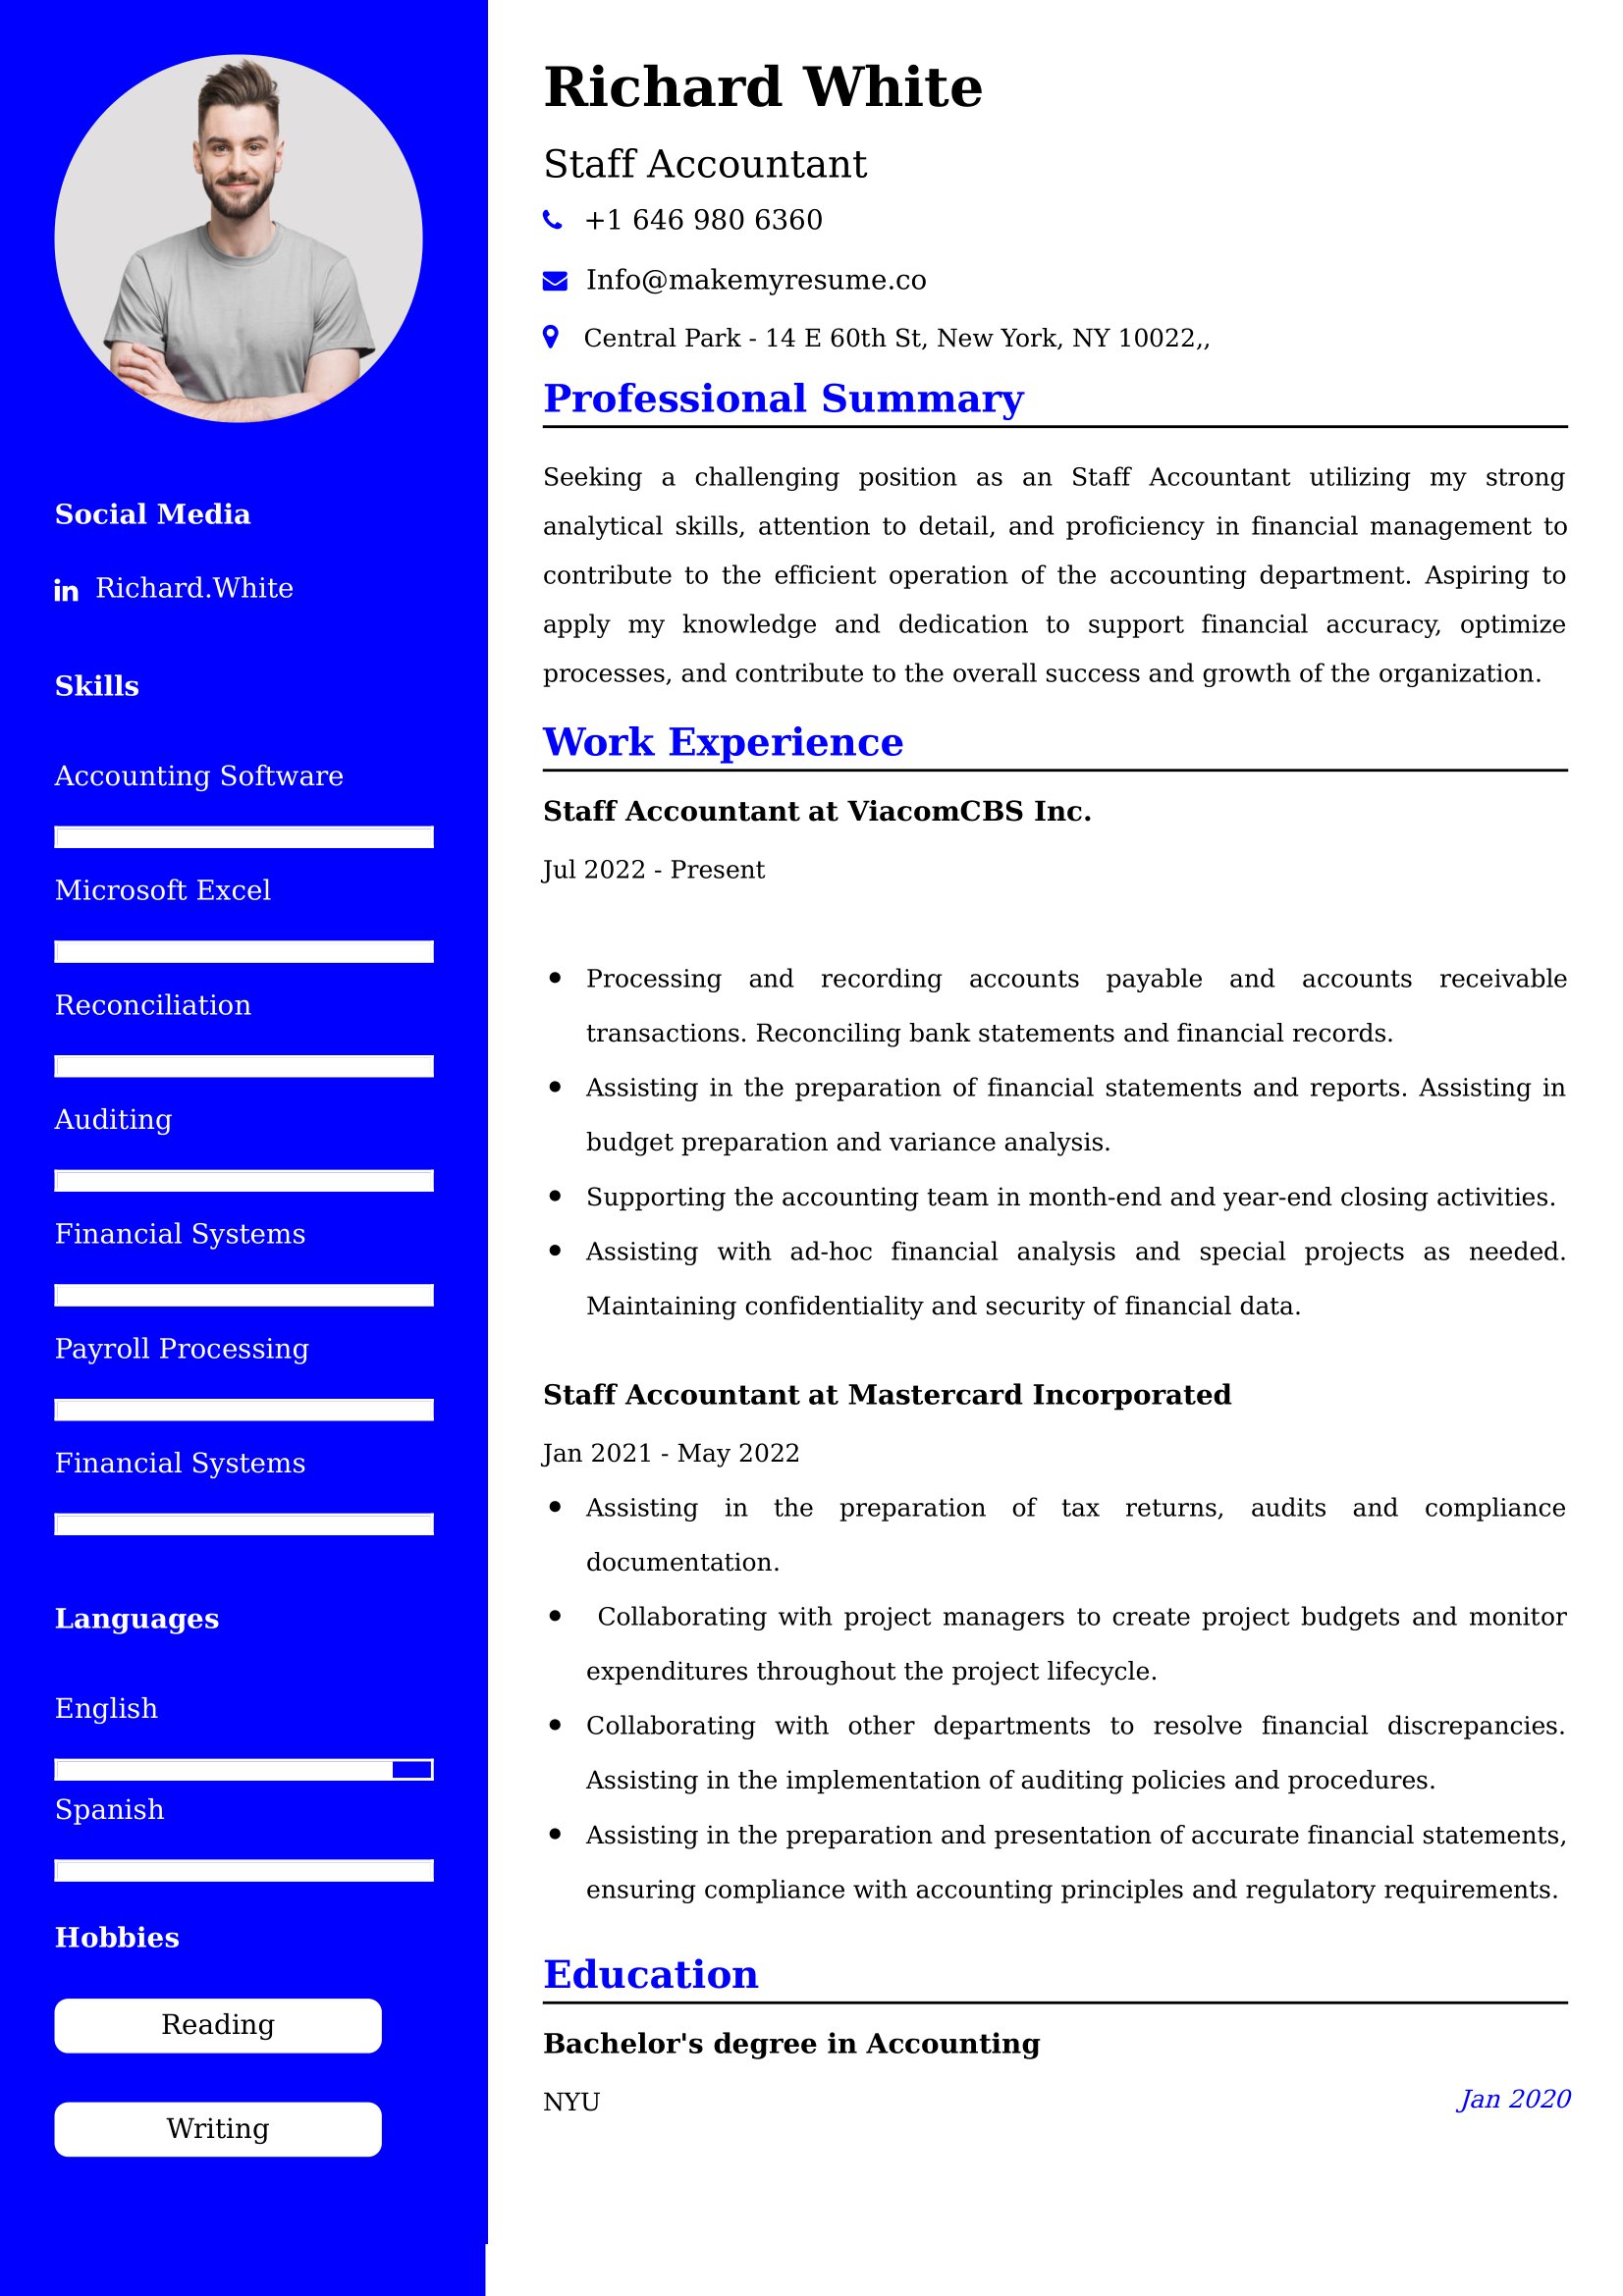 Staff Accountant Resume Examples India